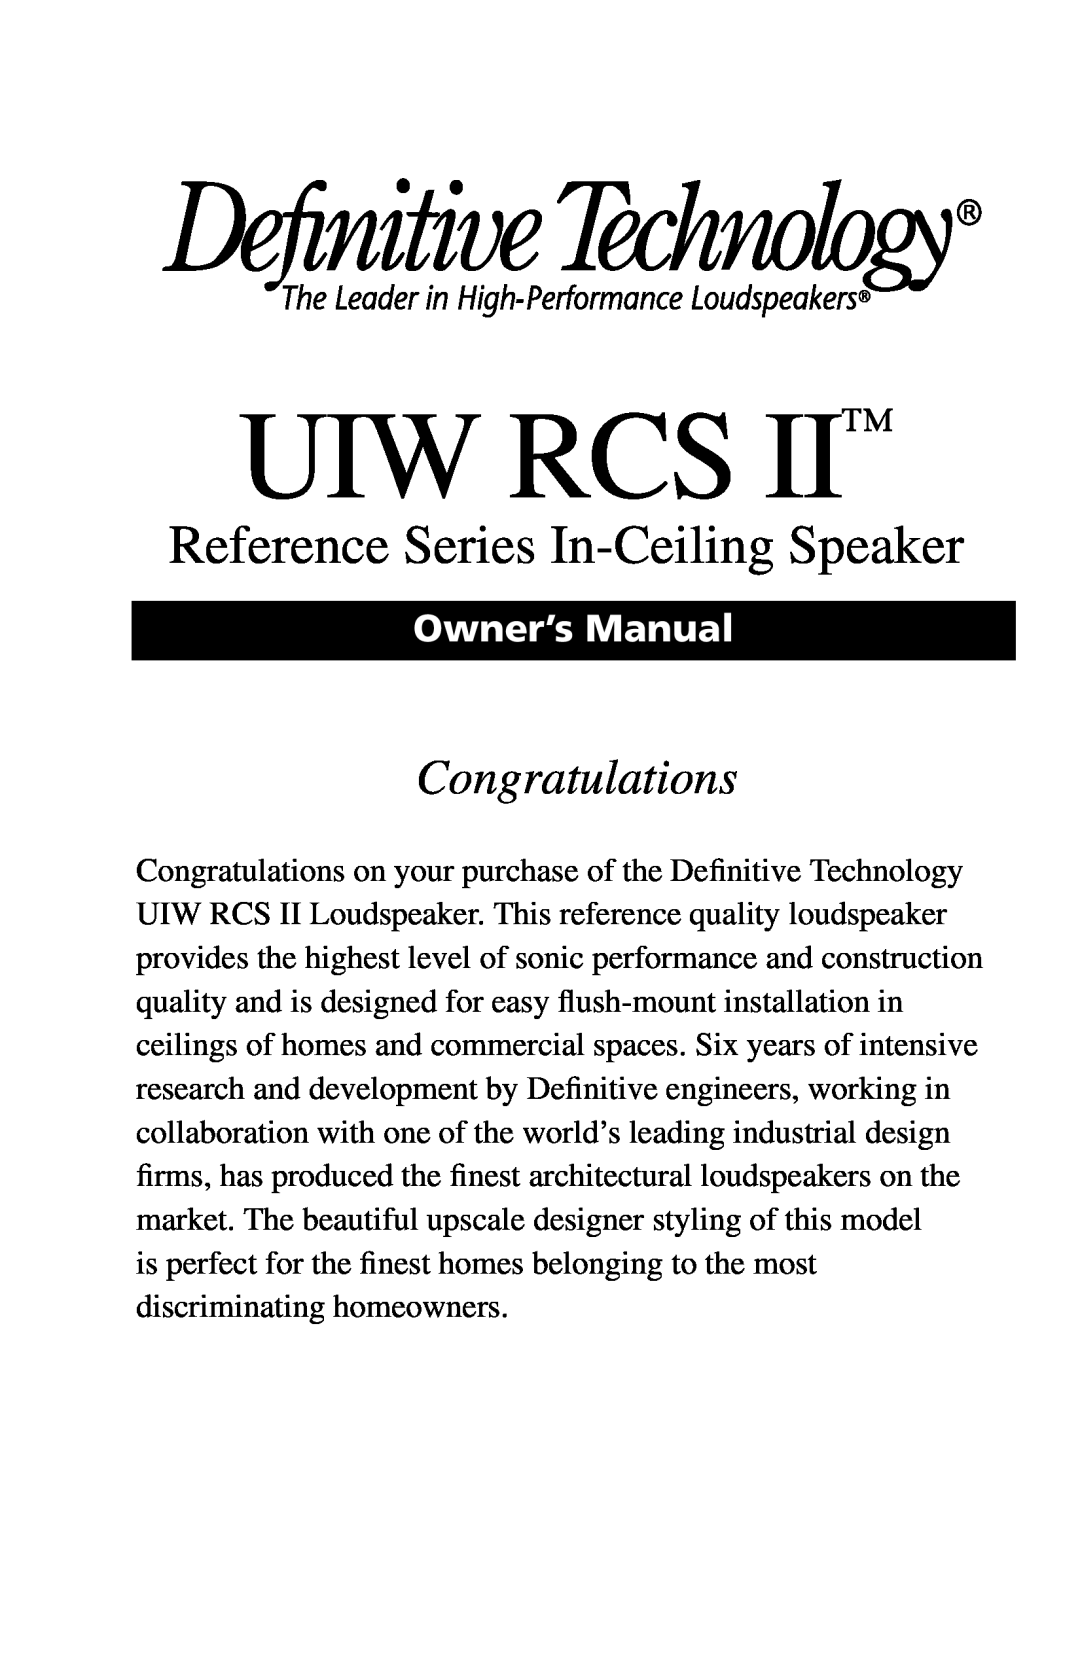 Definitive Technology UIW RCS II owner manual Uiw Rcs, Reference Series In-CeilingSpeaker, Congratulations 